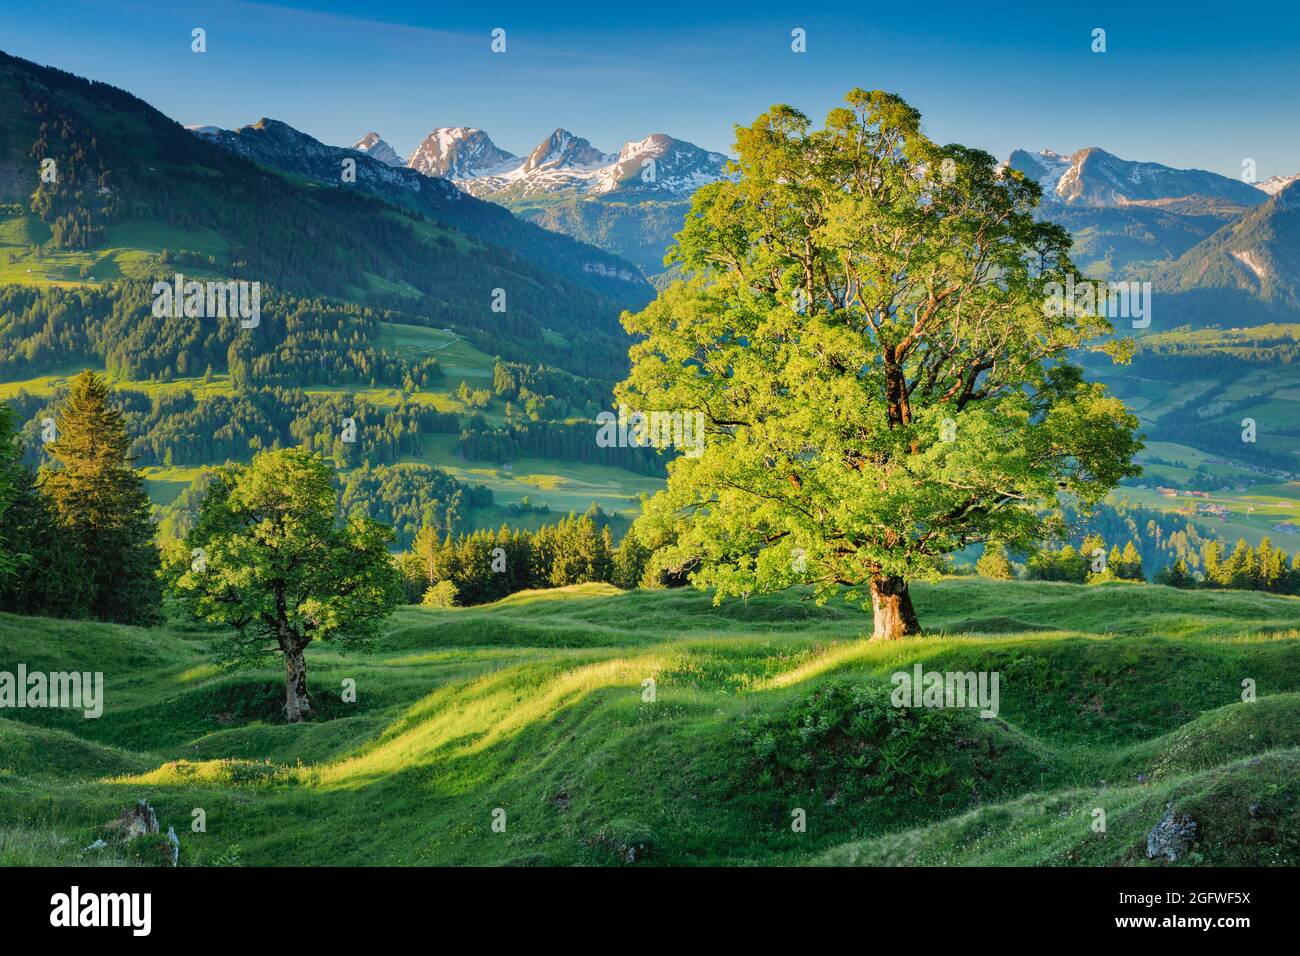 sycamore maple, great maple (Acer pseudoplatanus), in front of Churfirsten mountain range in the morning in spring, Switzerland, St. Gallen, Stock Photo